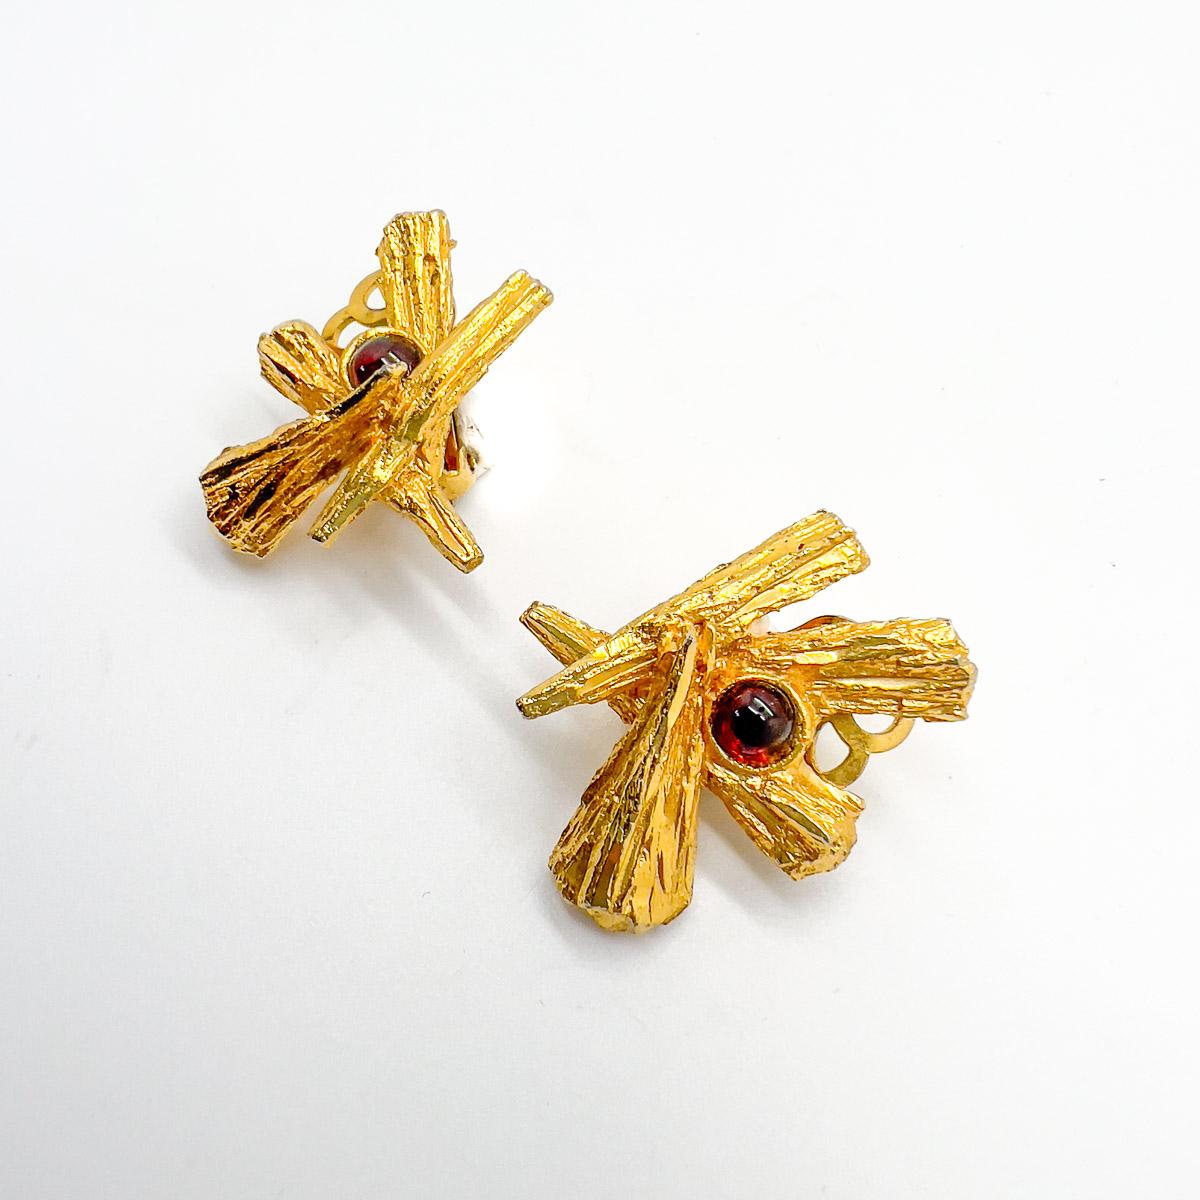 Vintage Bark Cabochon Garnet Earrings 1960s In Good Condition For Sale In Wilmslow, GB